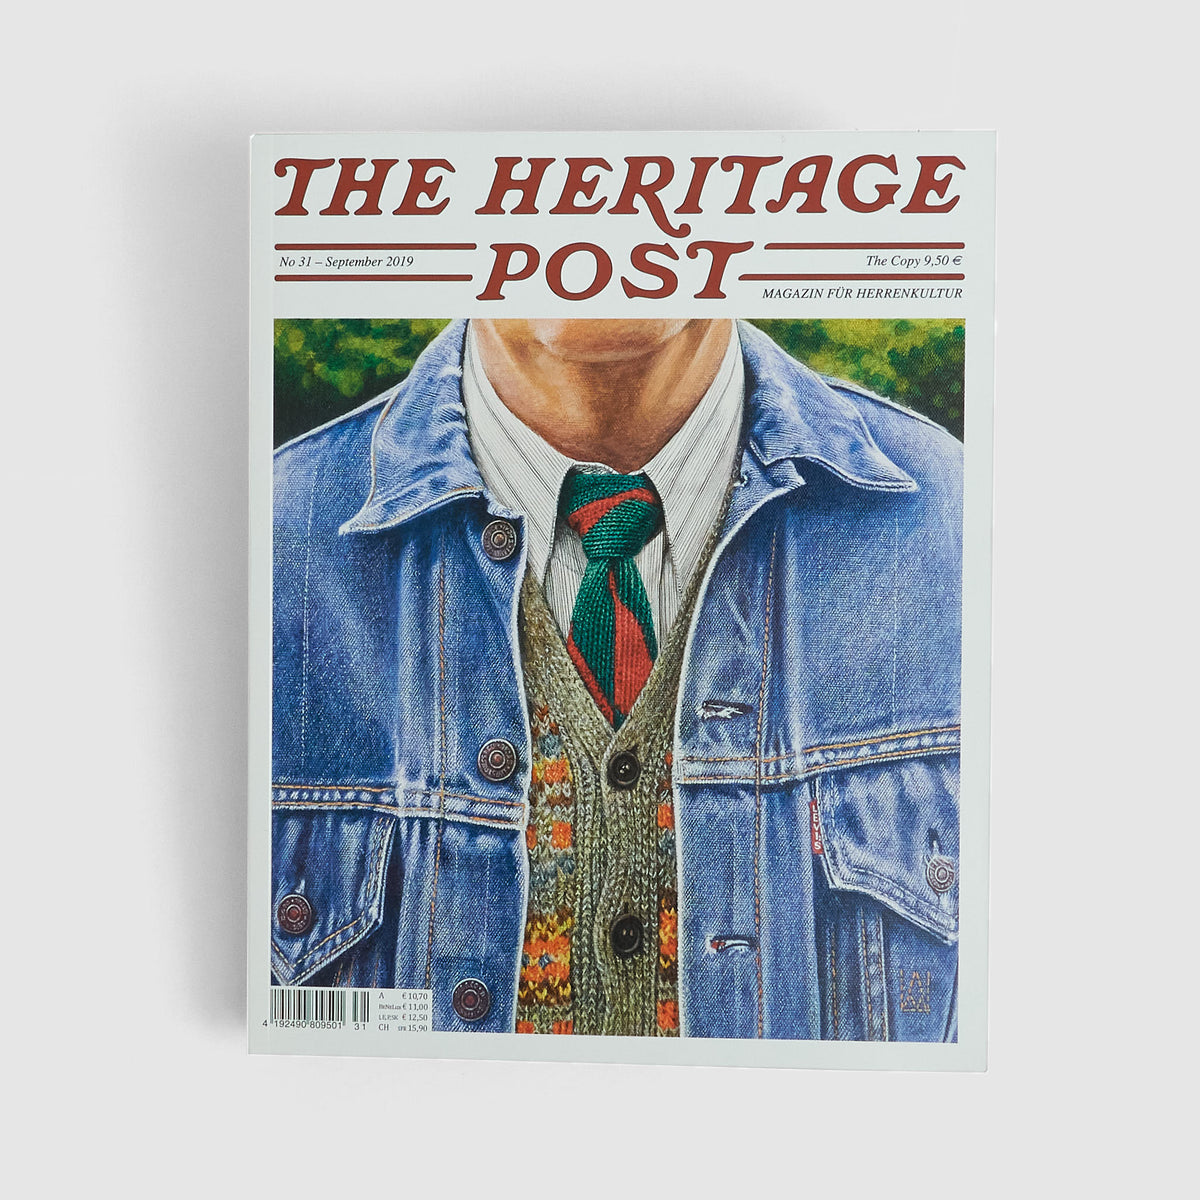 The Heritage Post No. 31